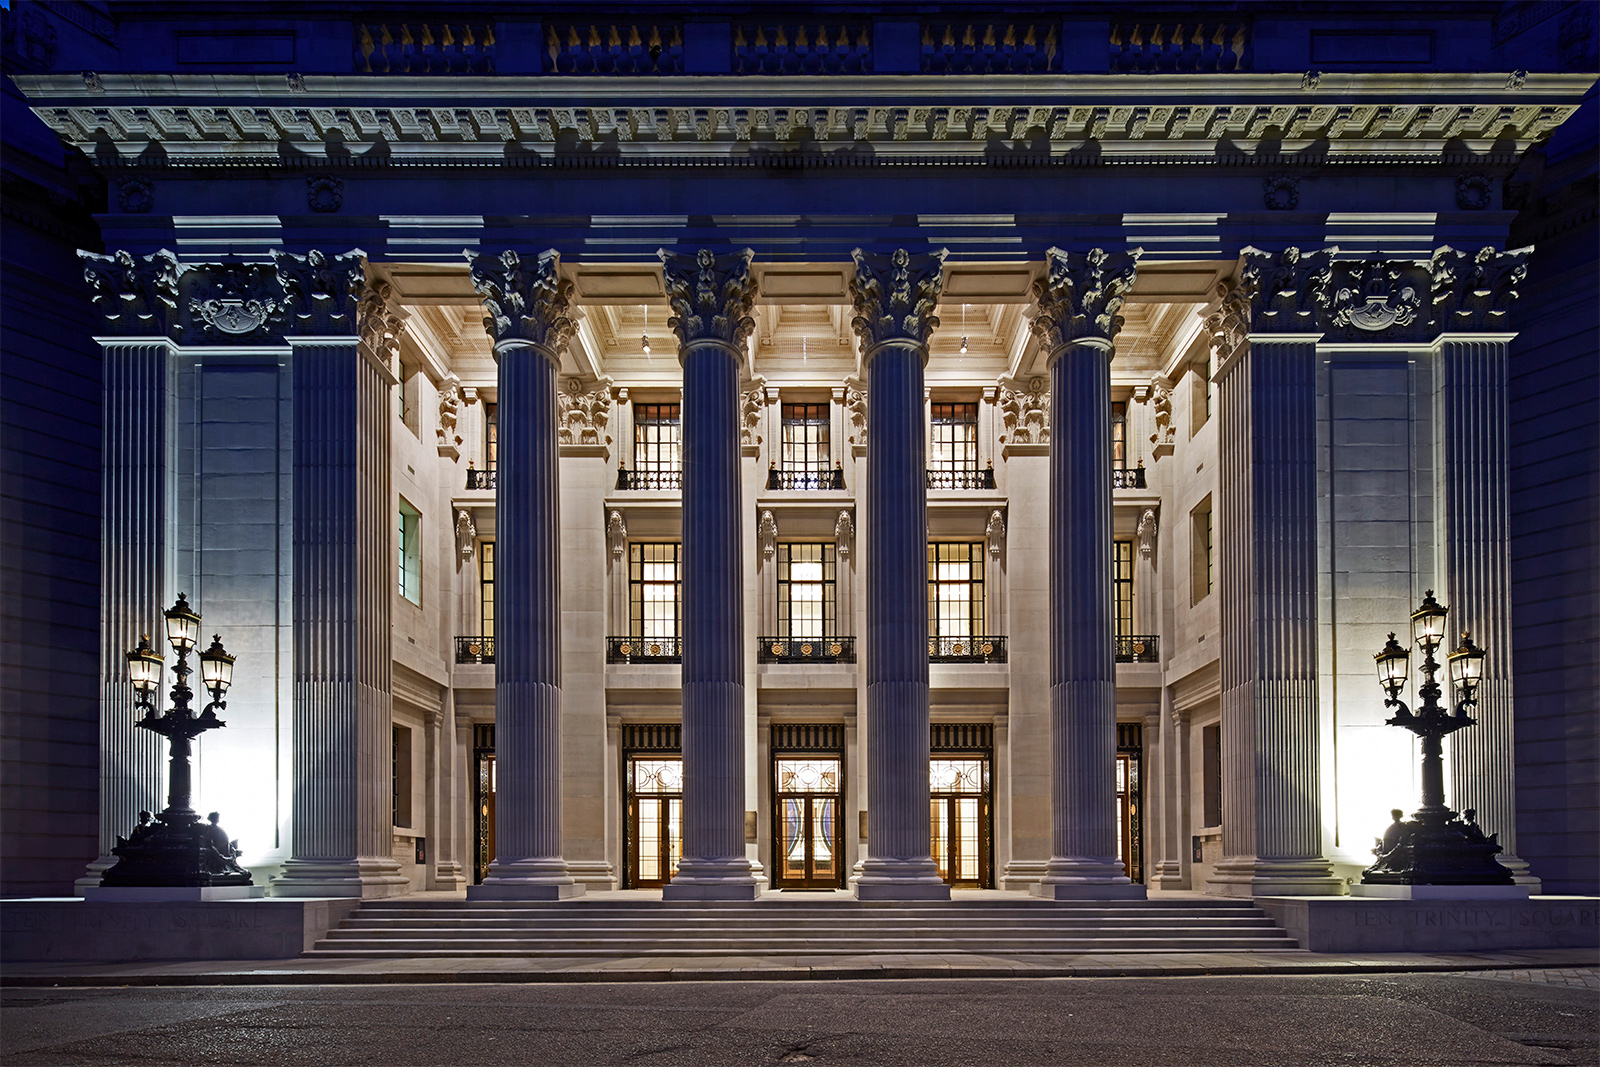 Hotels opening in 2017: Four Seasons London at Ten Trinity Square